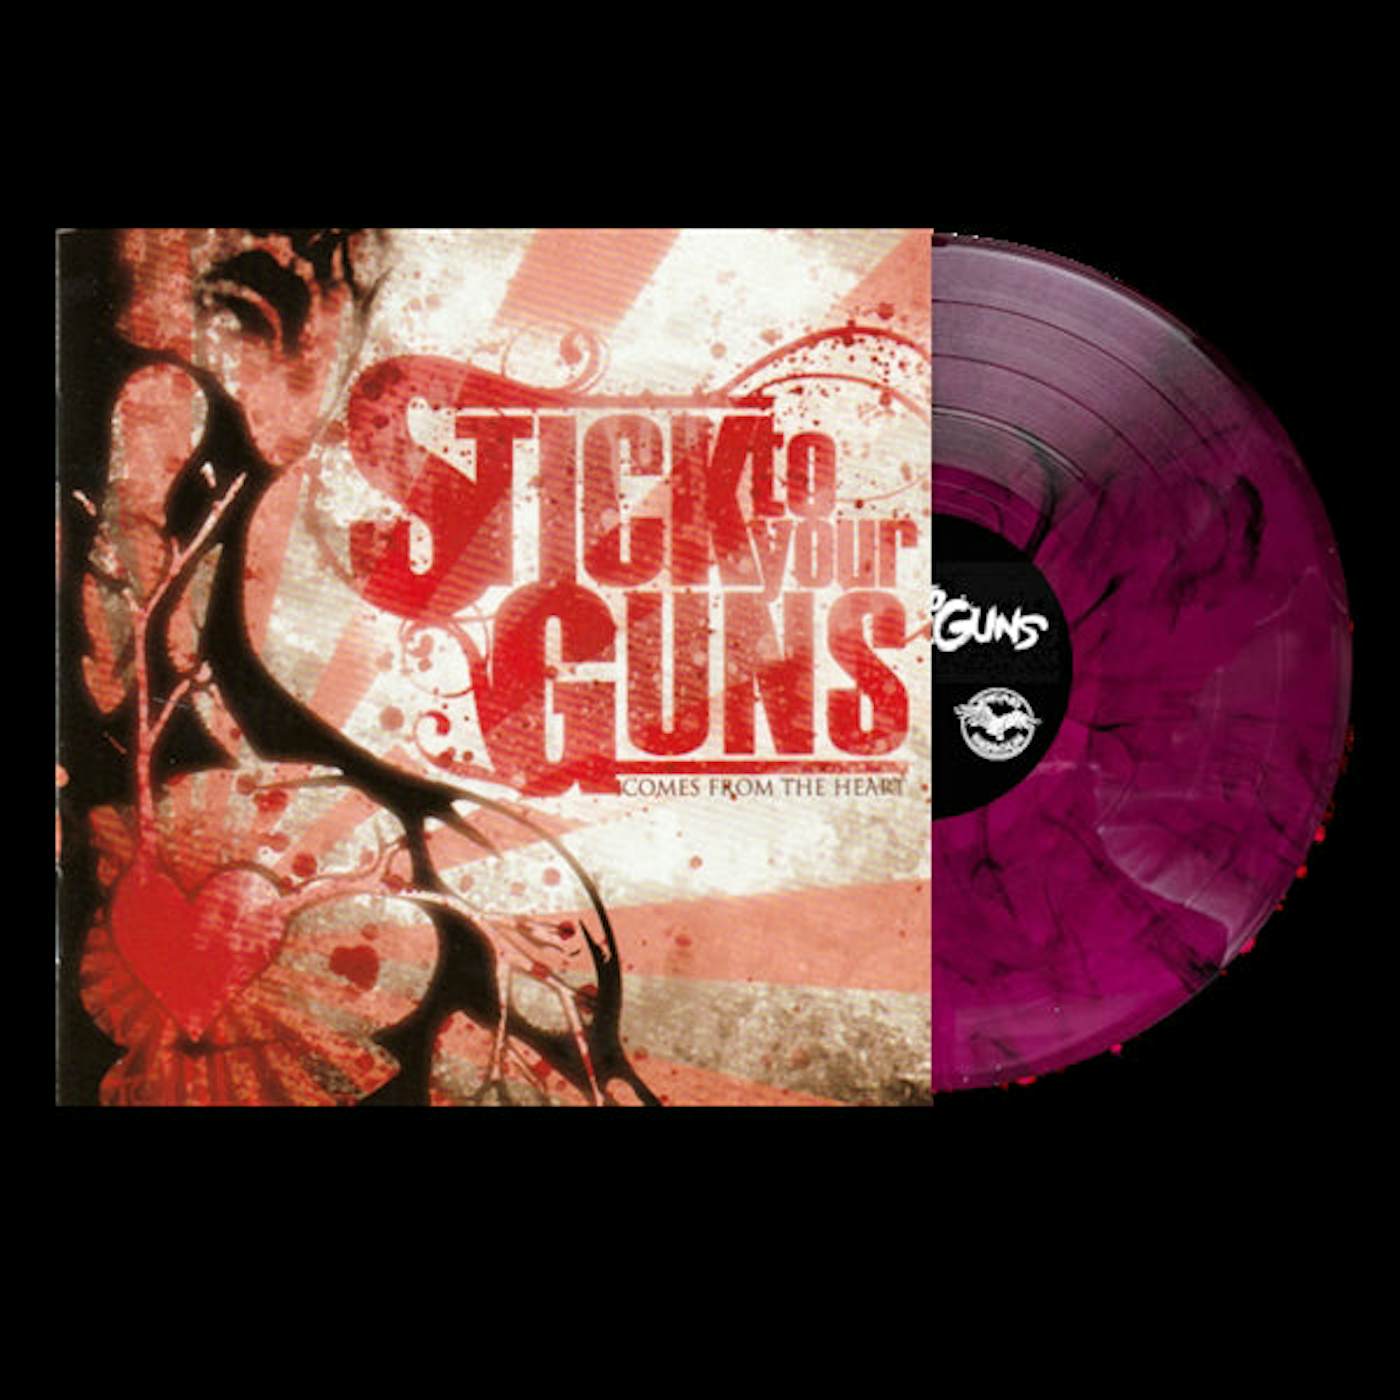 Stick To Your Guns LP - Comes From The Heart (Magenta/Black Smoke Vinyl)